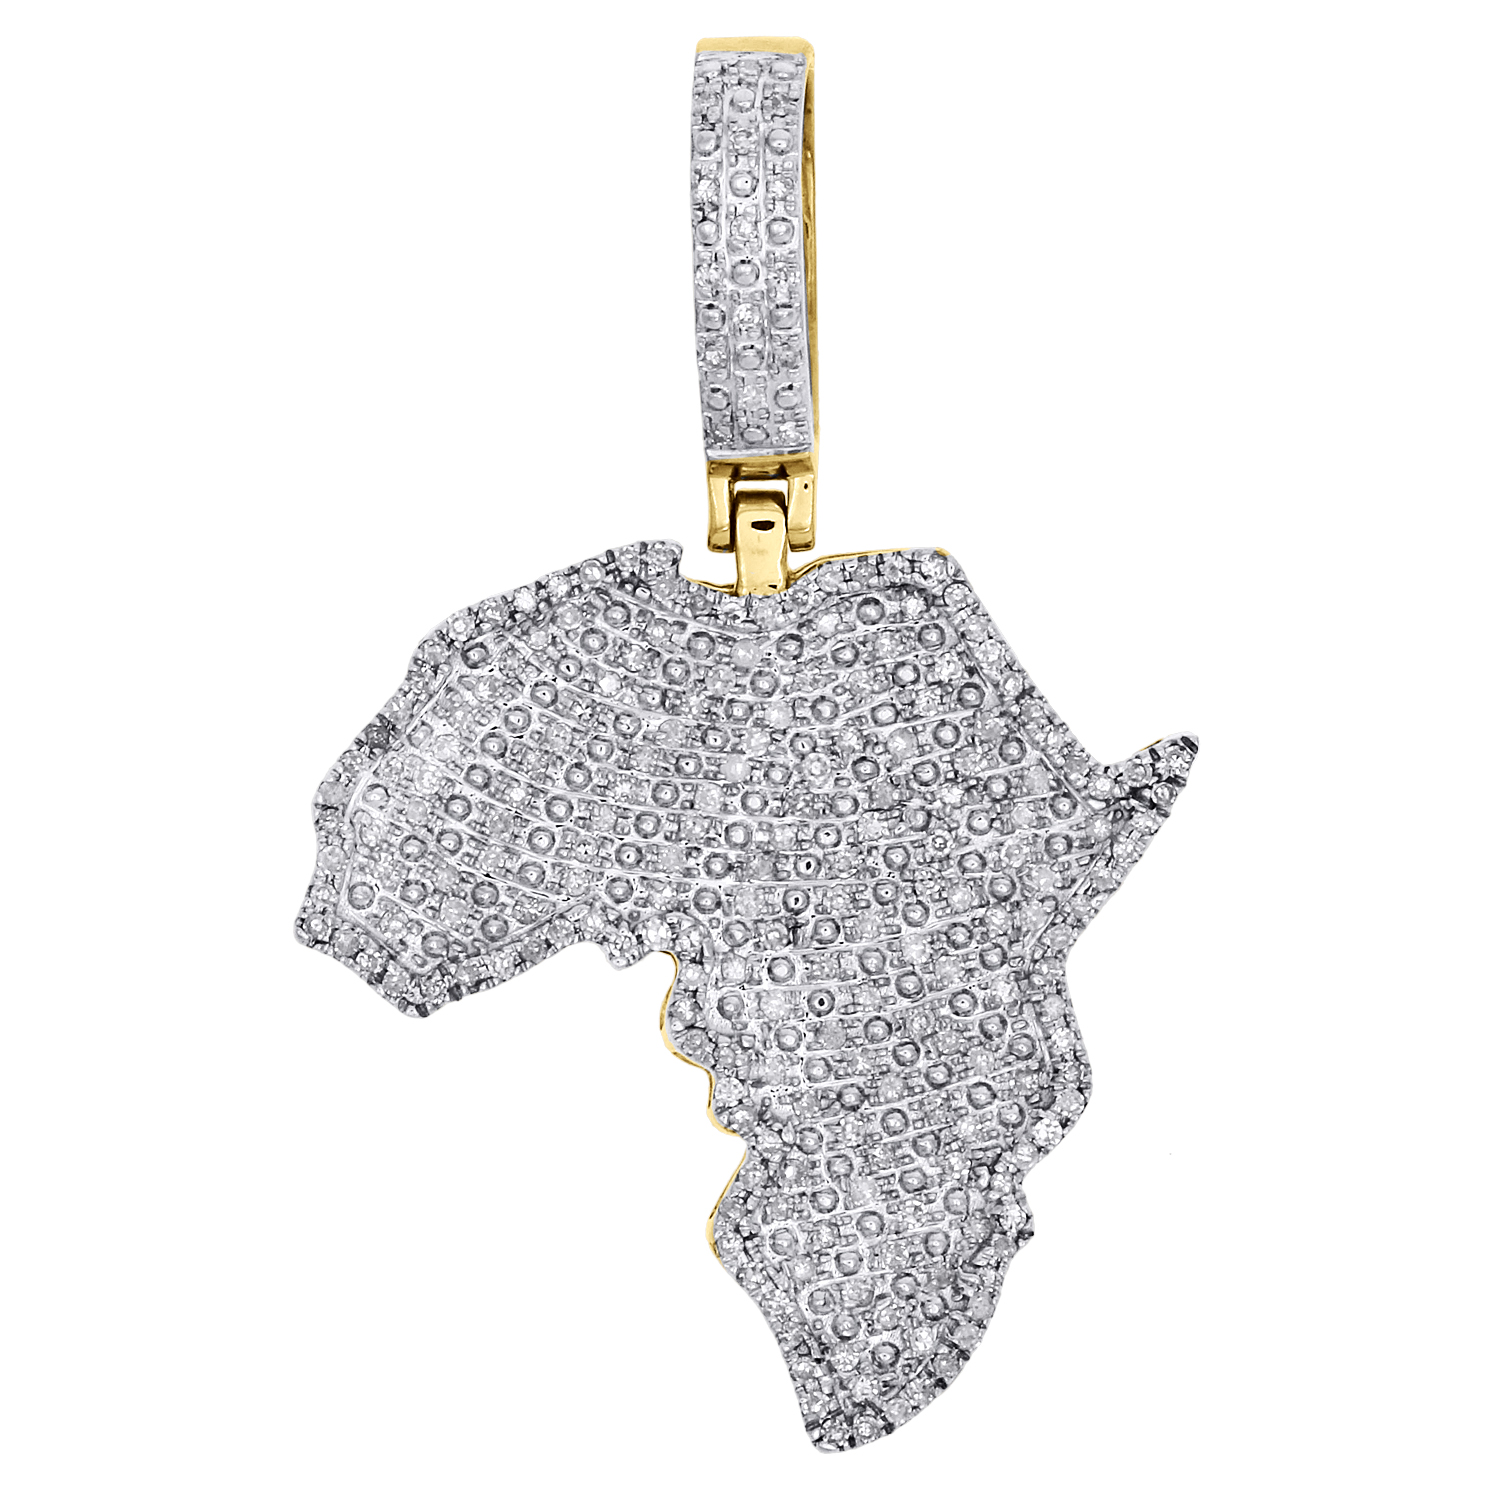 10K Yellow Gold Real Diamond Africa Country Map Pendant 1.70